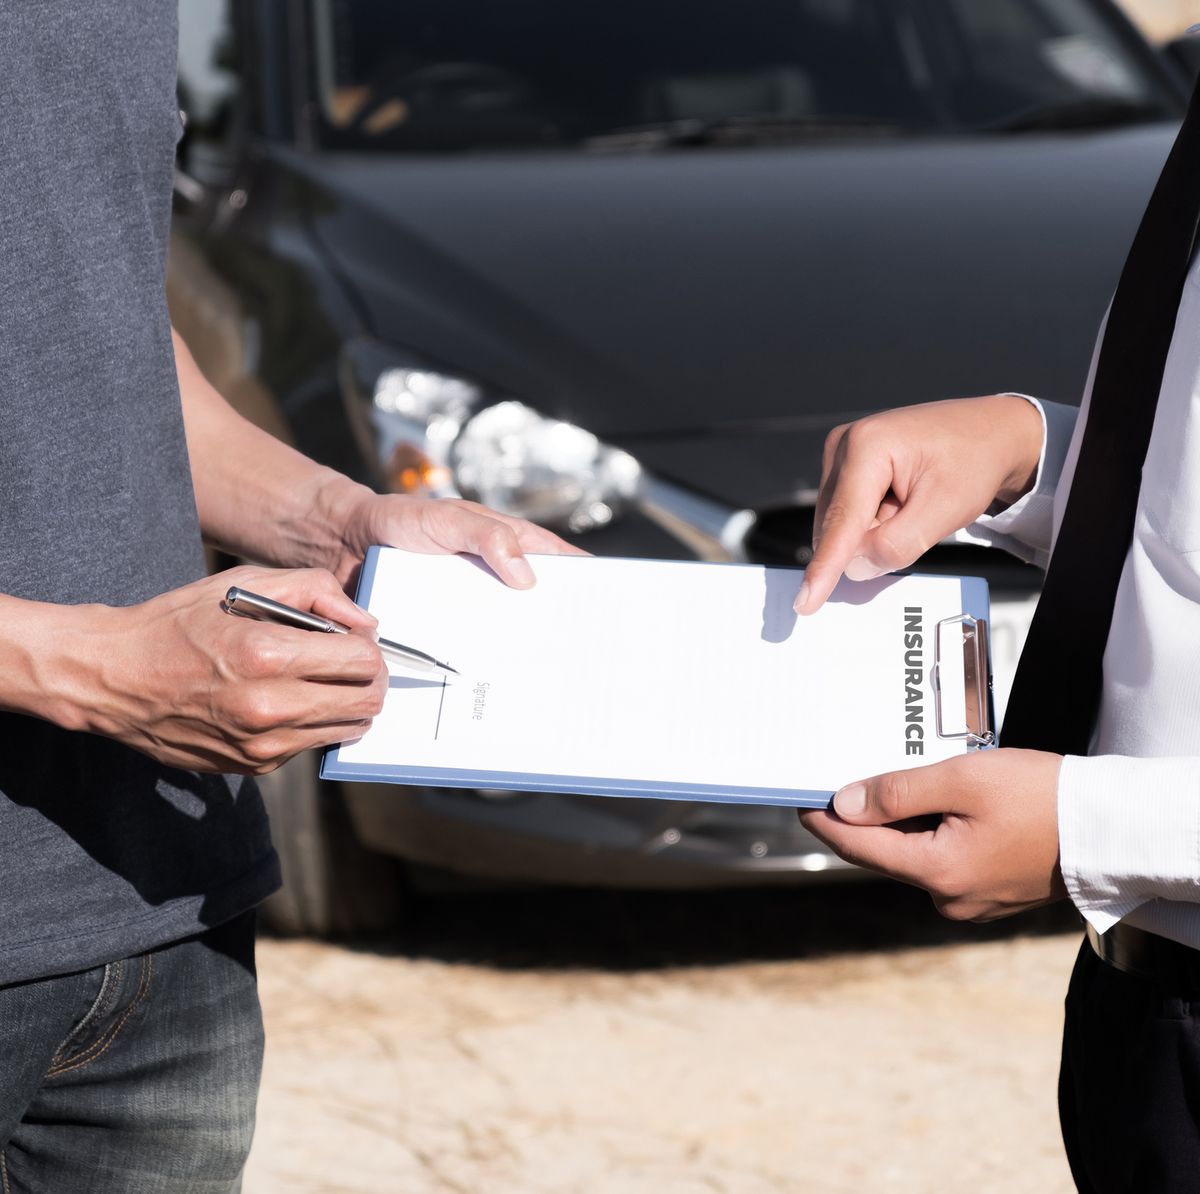 How Much Does Insurance Increase After an Accident? - NerdWallet